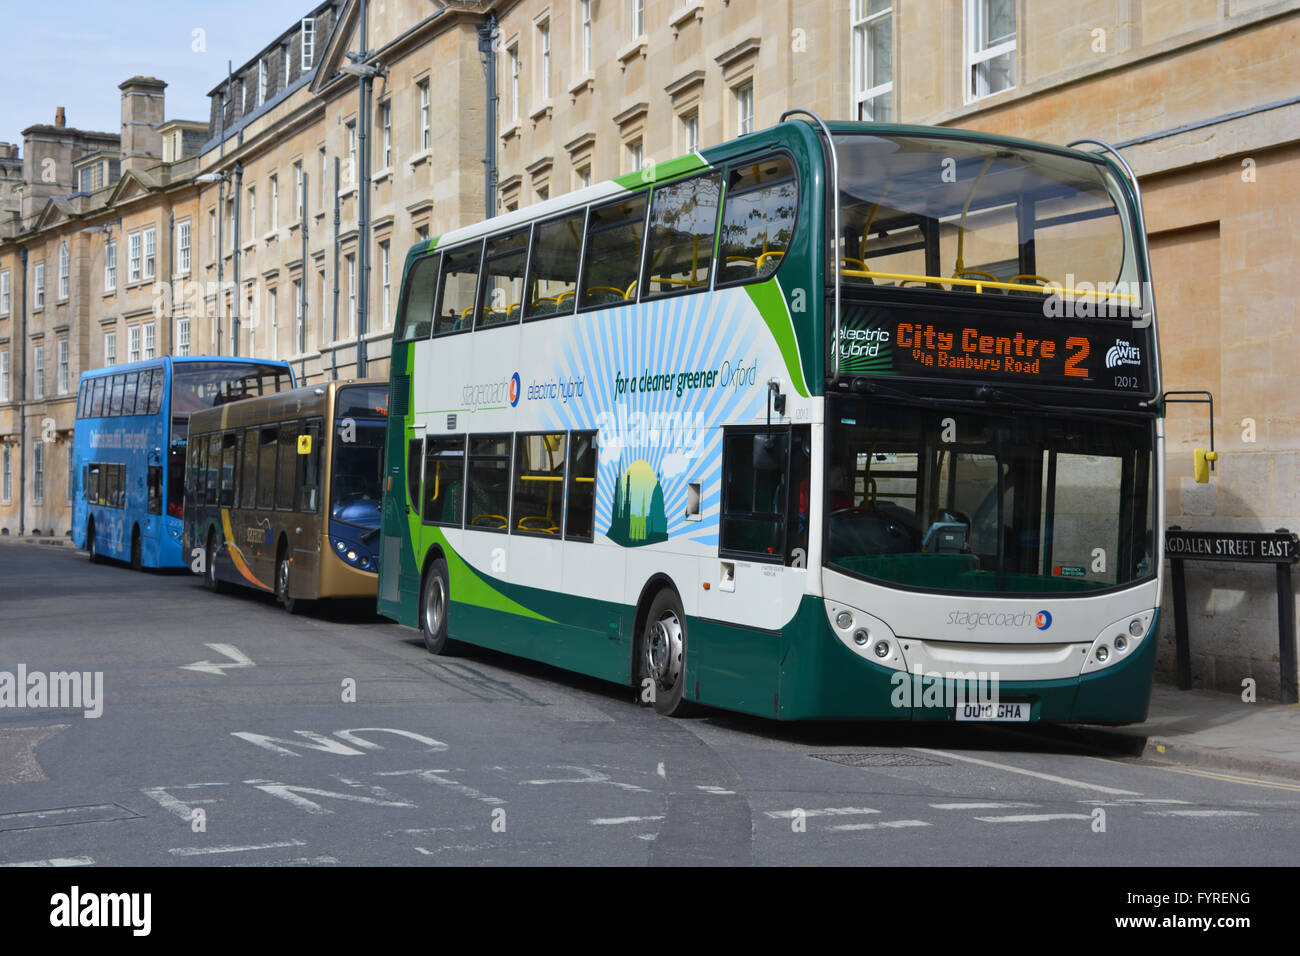 Stagecoach Electric Hybrid bus in Oxford city centre. Stock Photo